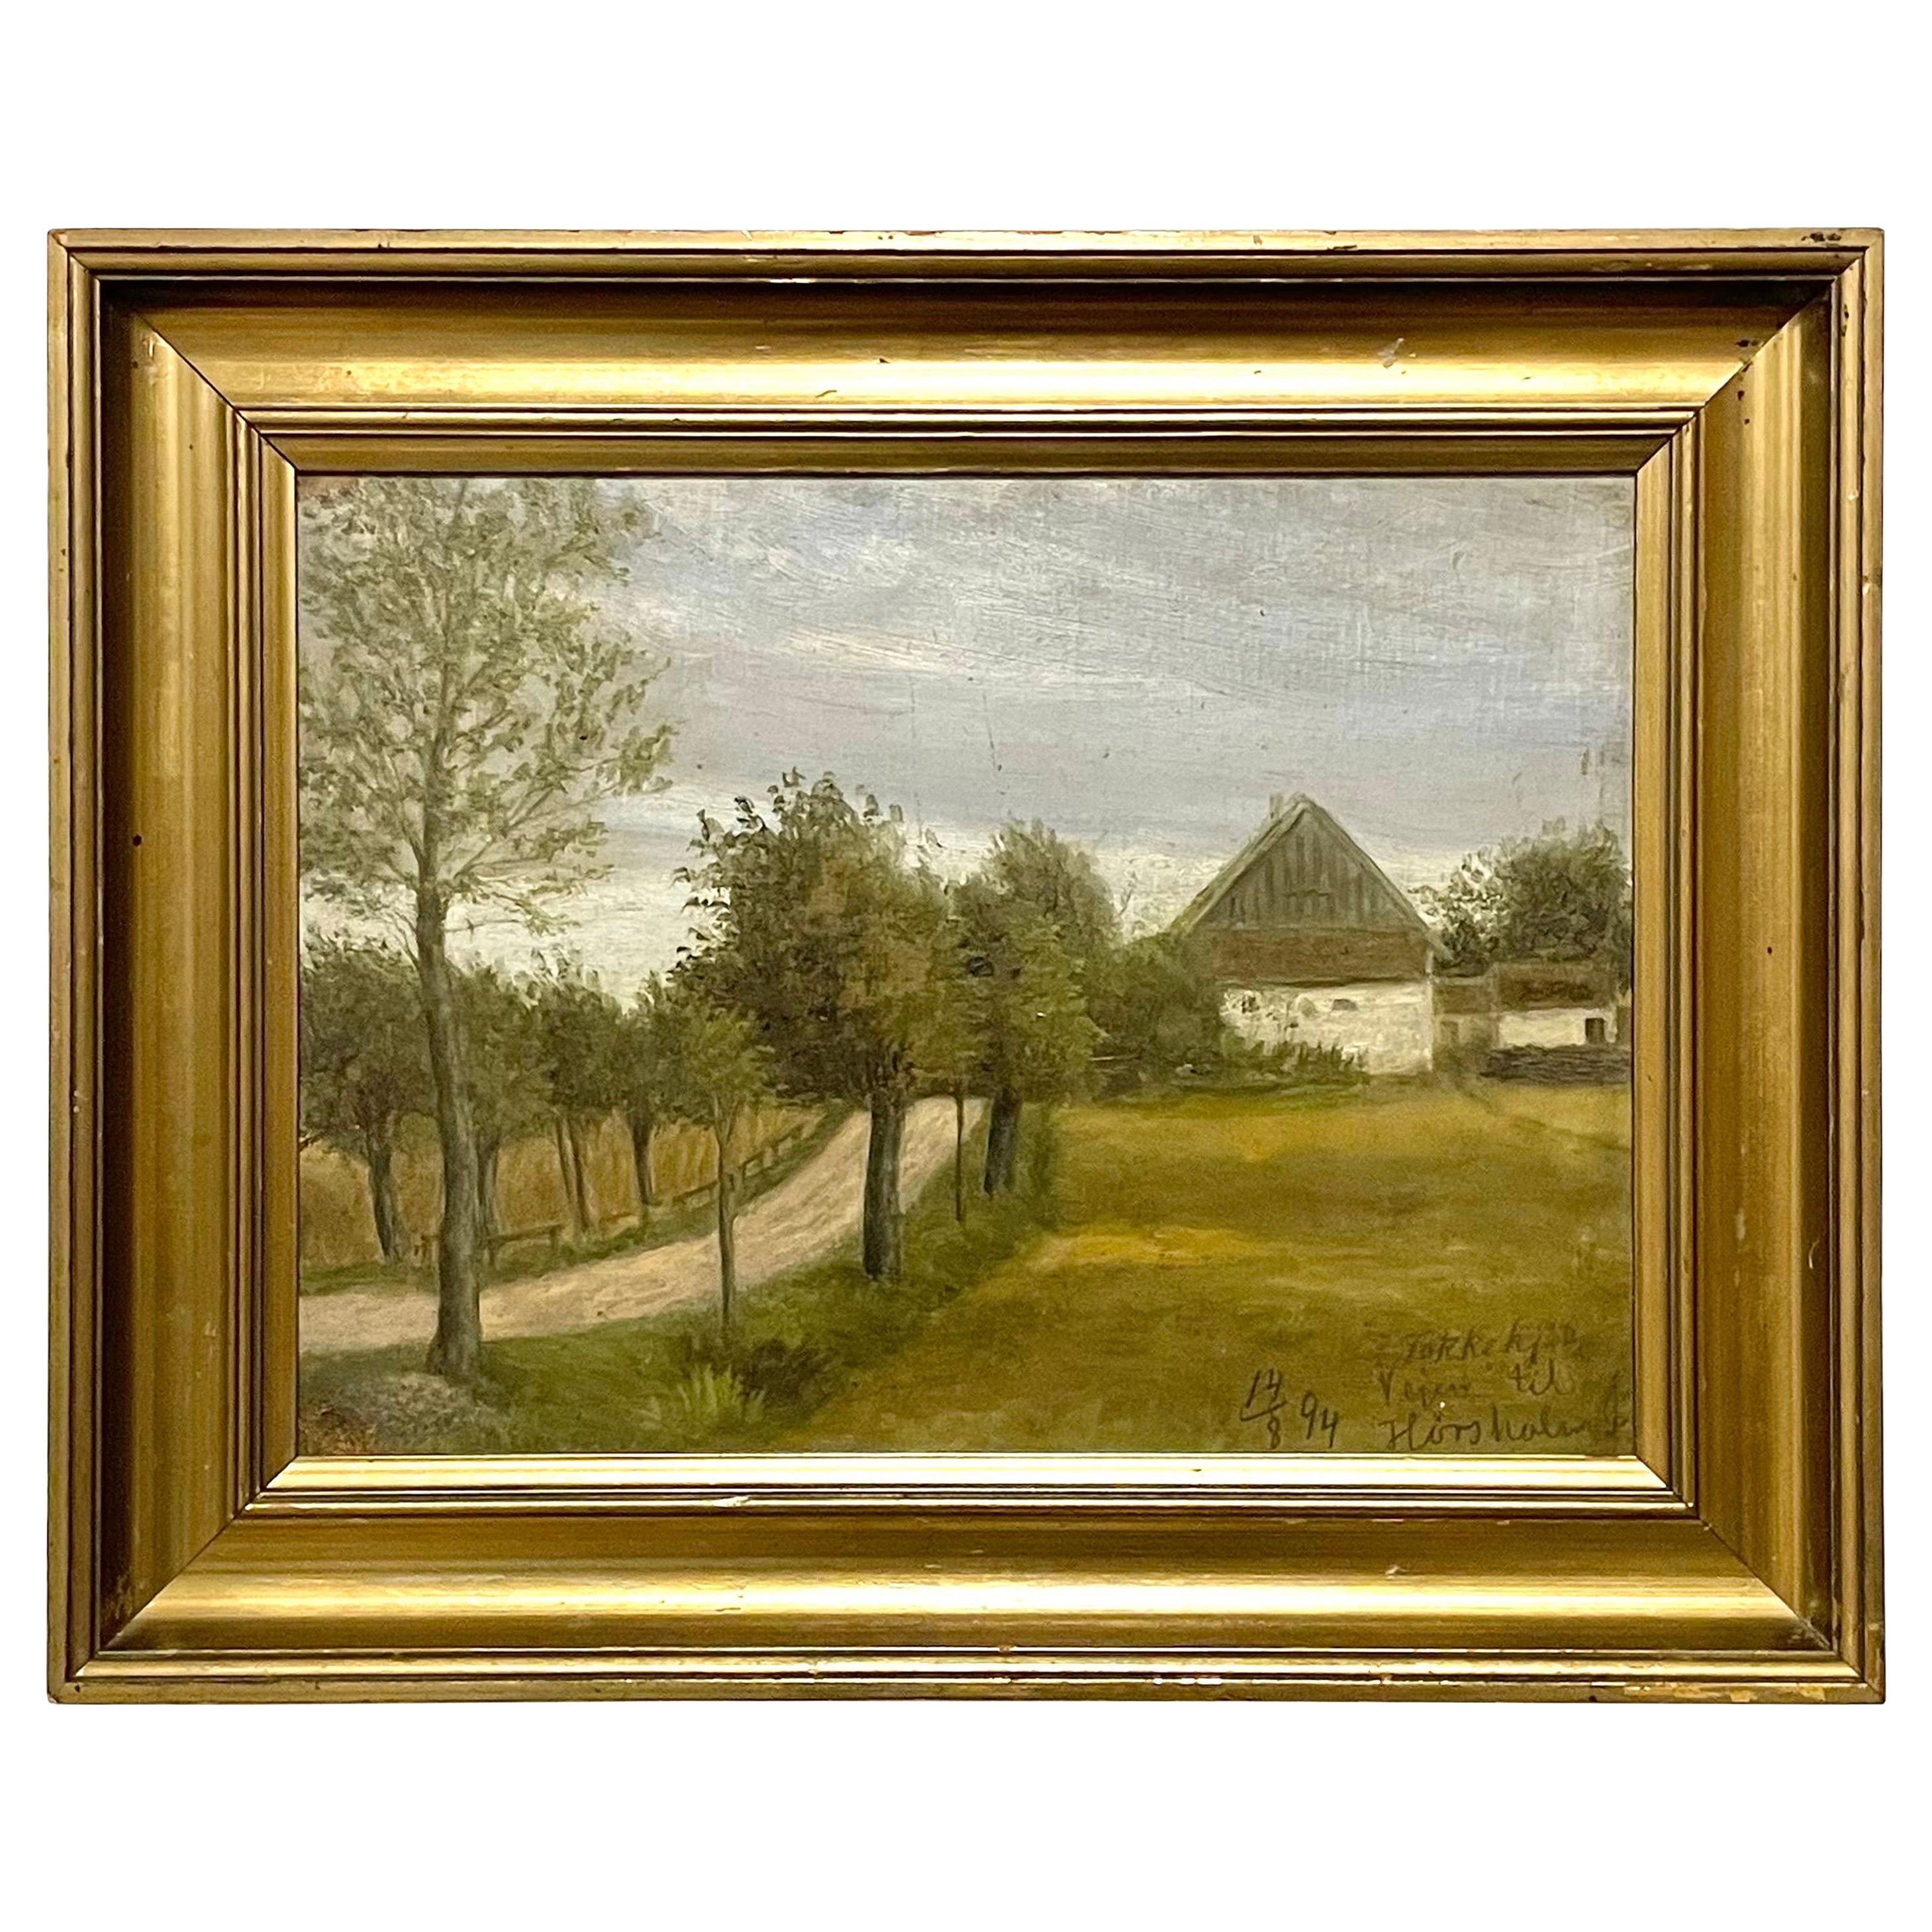 Late 19th century antique landscape oil painting with motive from Hørsholm